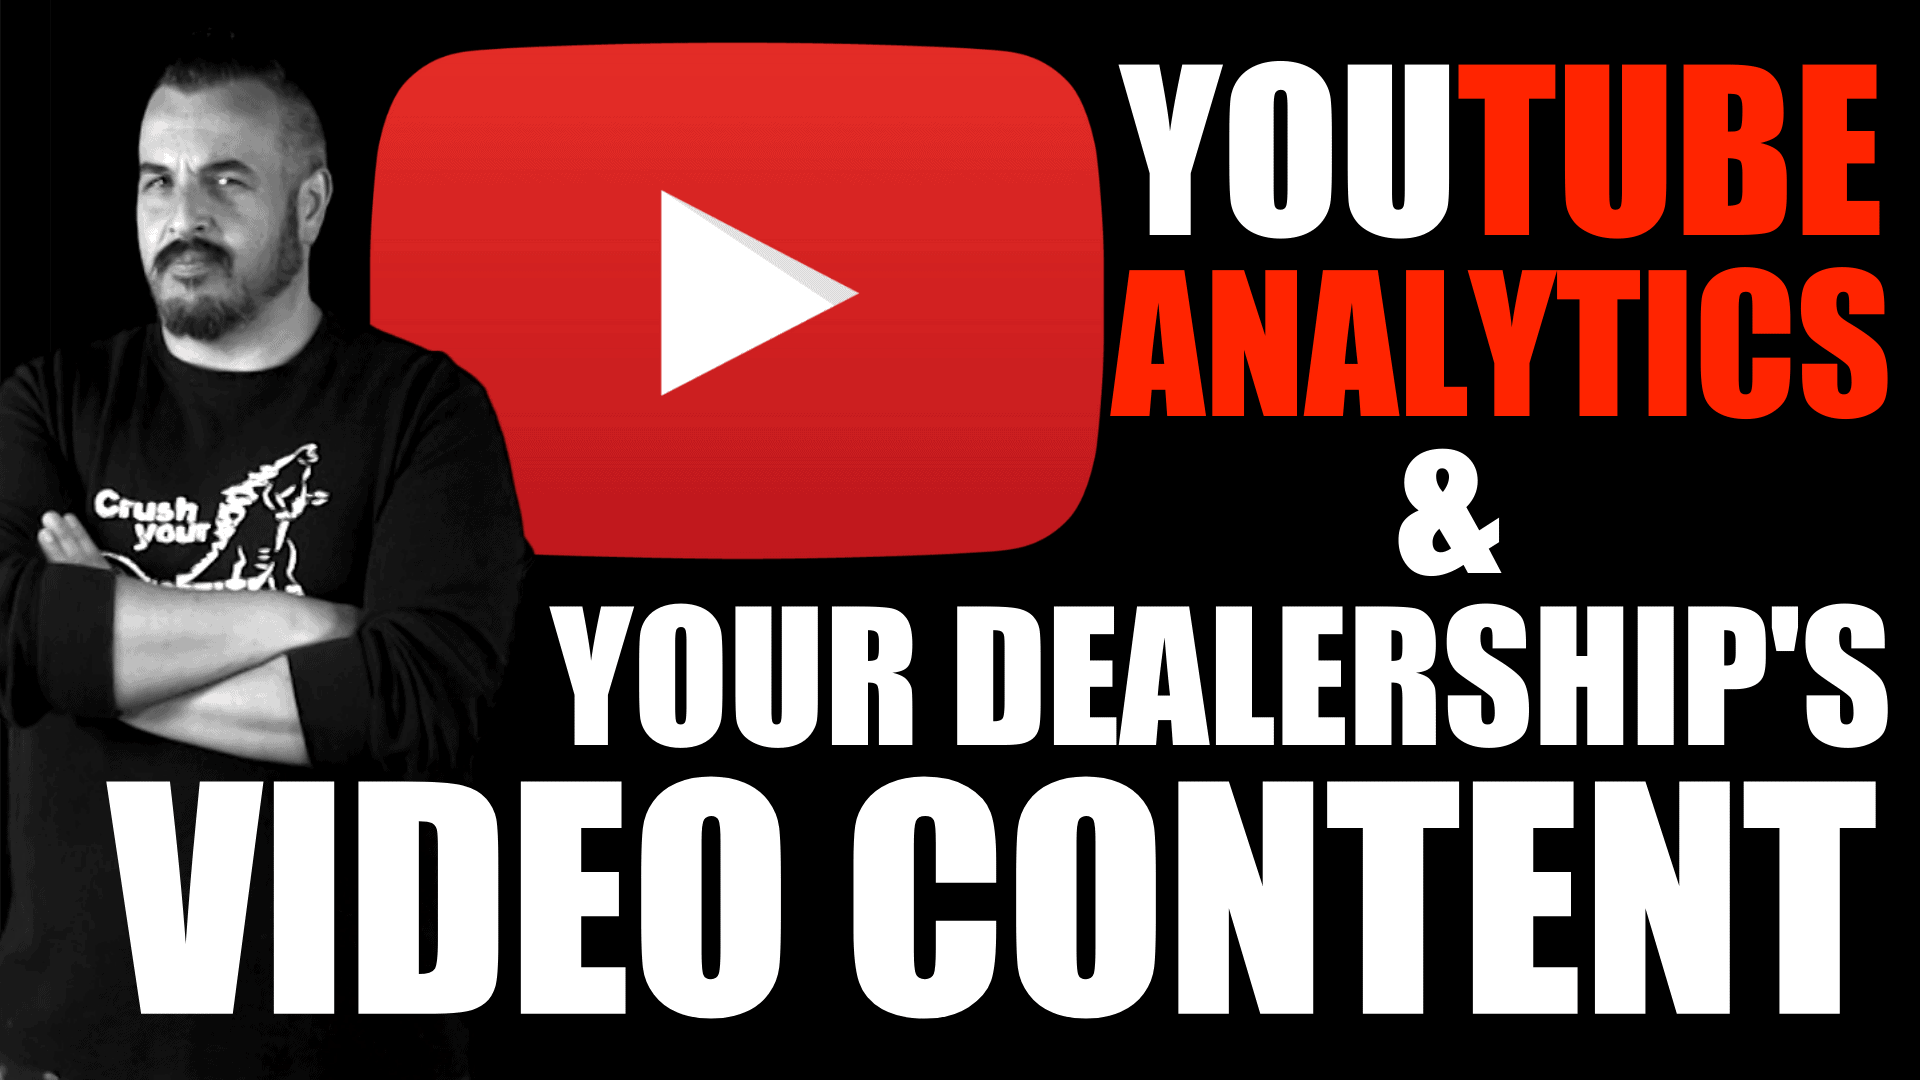 YouTube Analytics &Your Dealership’s Video Content